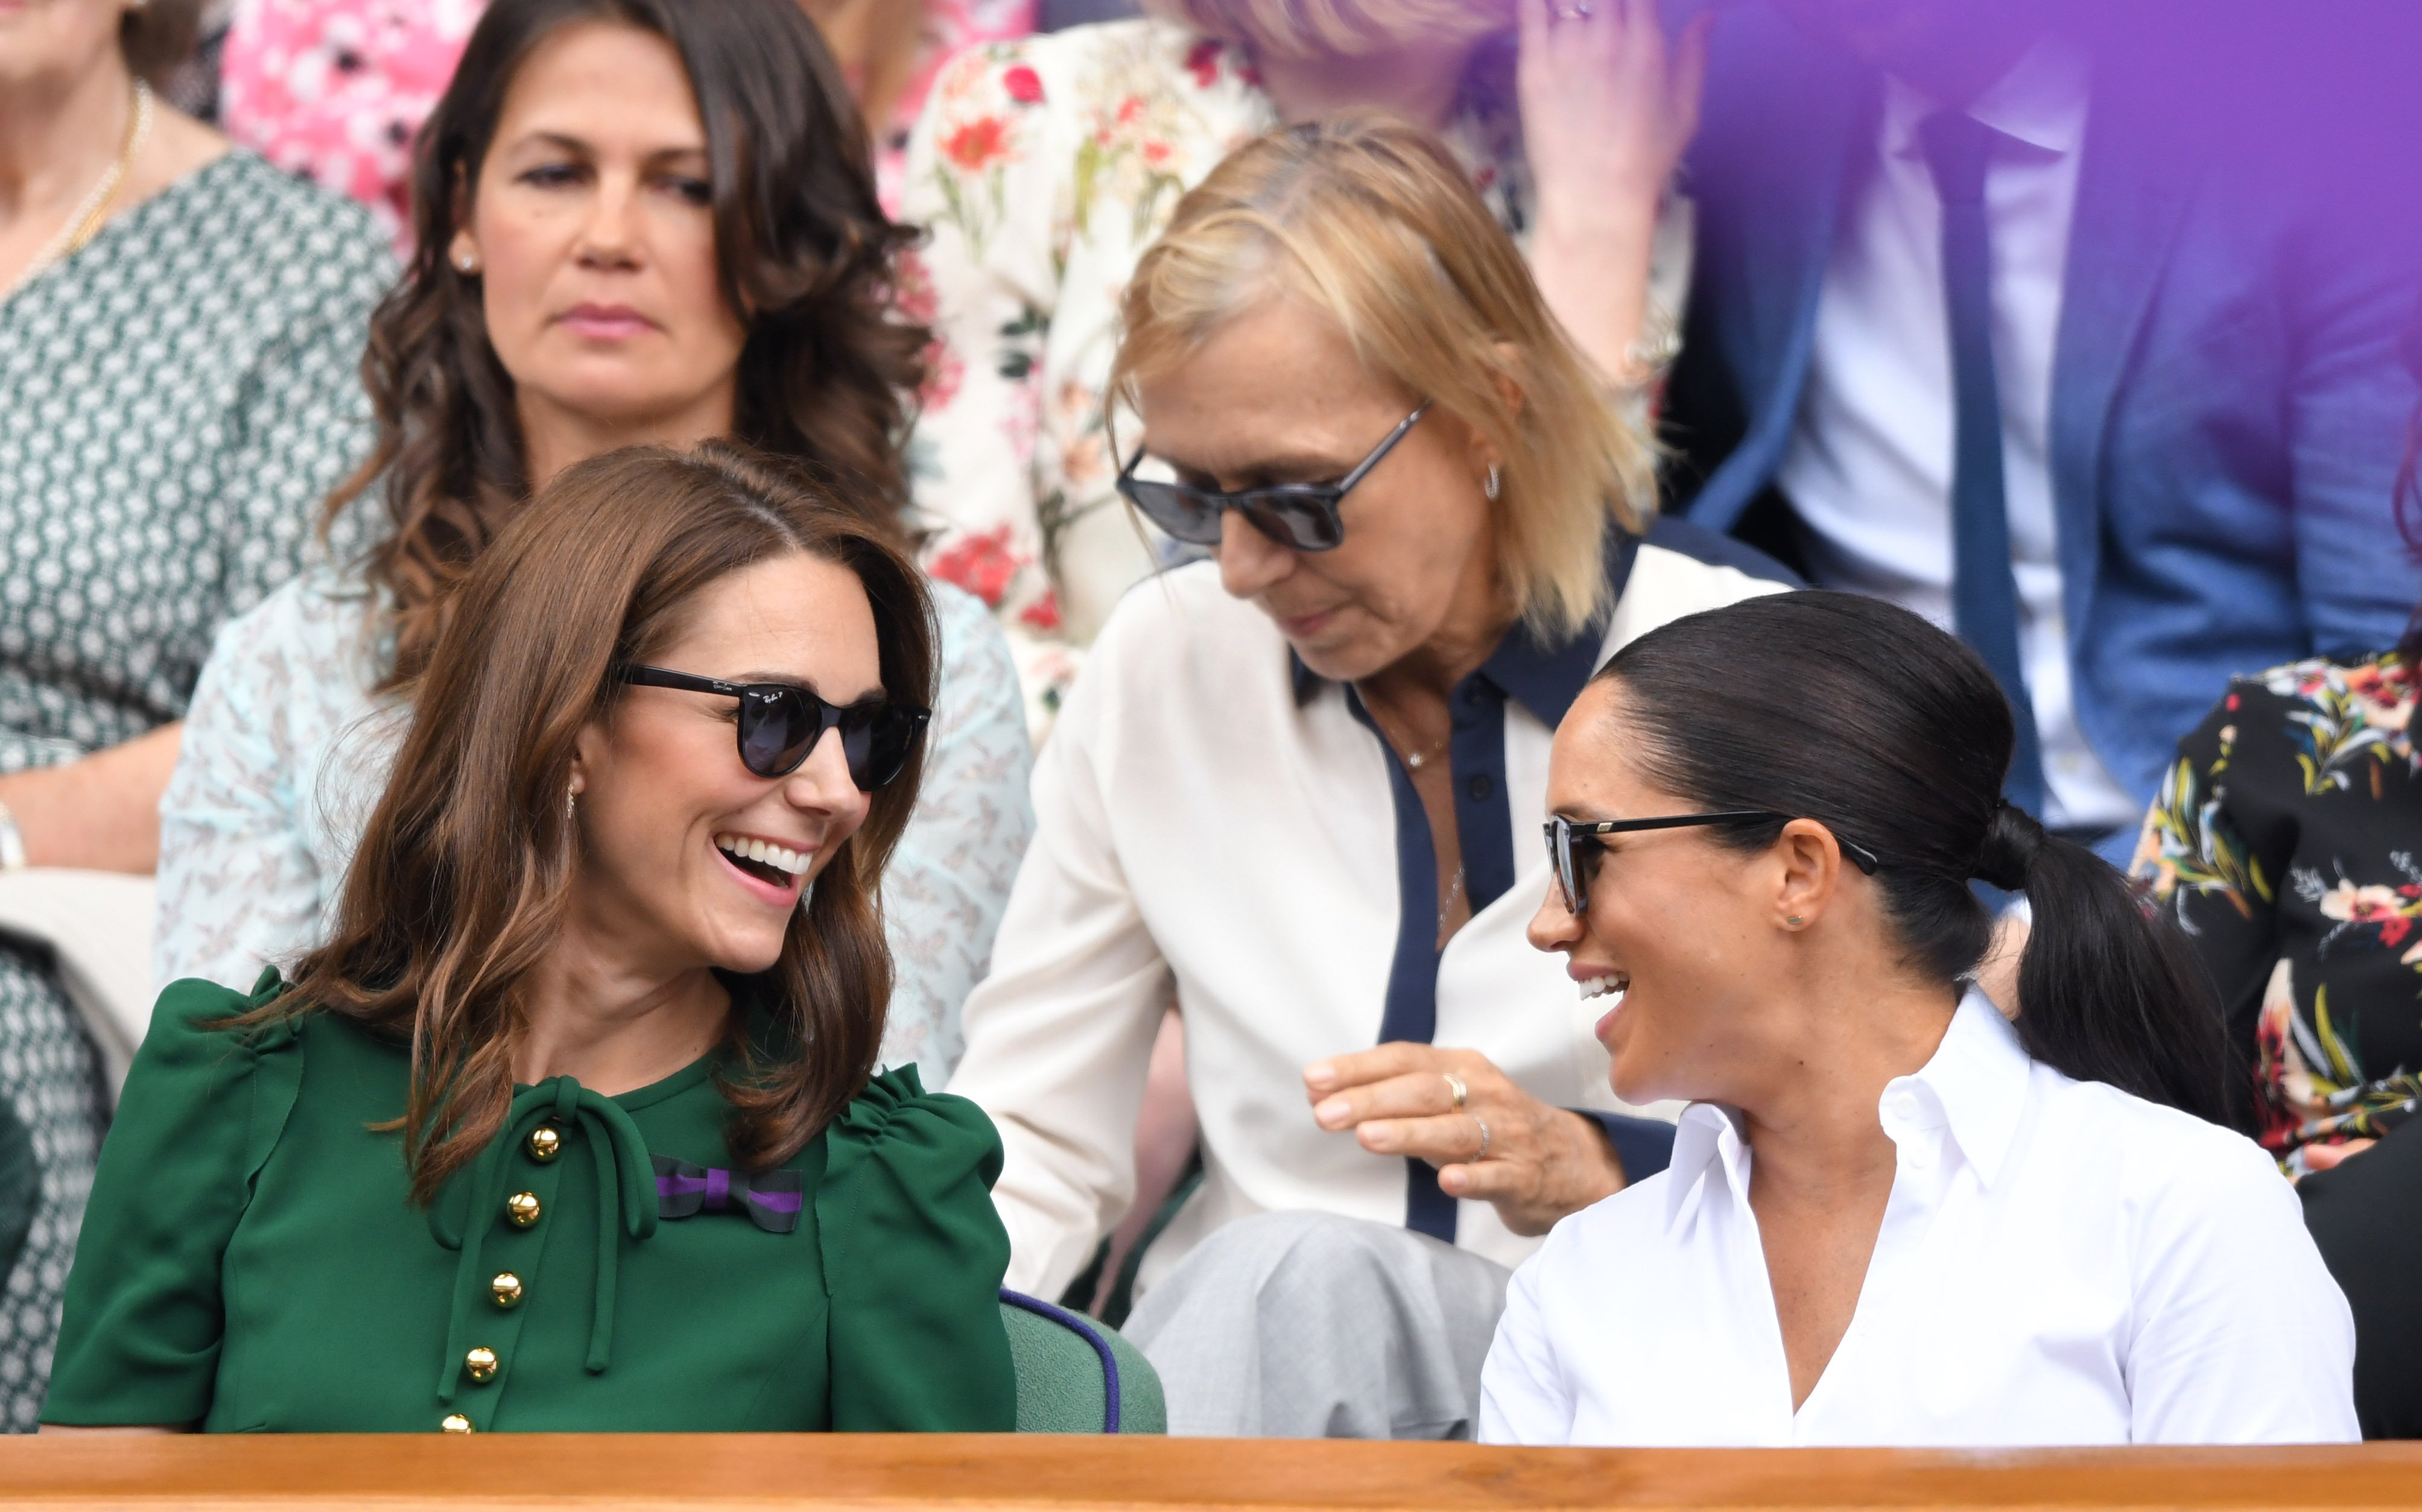 Kate Middleton and Meghan Markle pictured in the Royal Box on Centre Court during day twelve of the Wimbledon Tennis Championships at All England Lawn Tennis and Croquet Club on July 13, 2019 in London, England. / Source: Getty Images